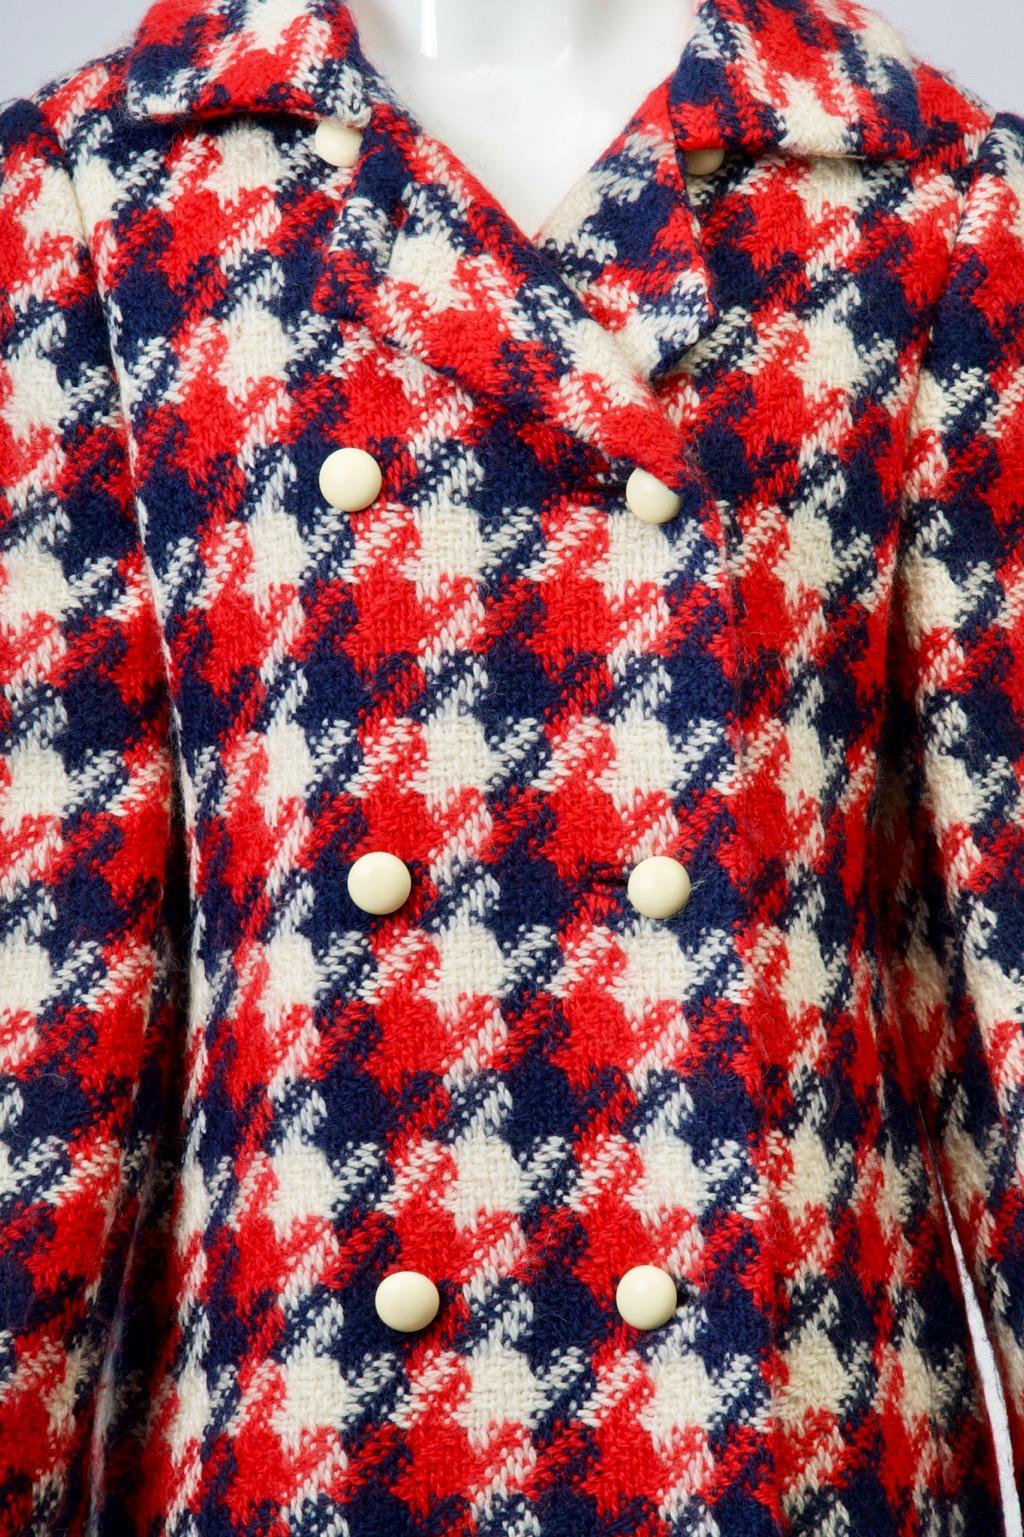 1960s double-breasted coat by one of America's best manufacturers is fashioned of a wide-weave wool in red, white, and blue large-scale herringbone plaid. The coat features a half-belt in back above an inverted pleat, hidden pockets, and ivory toned